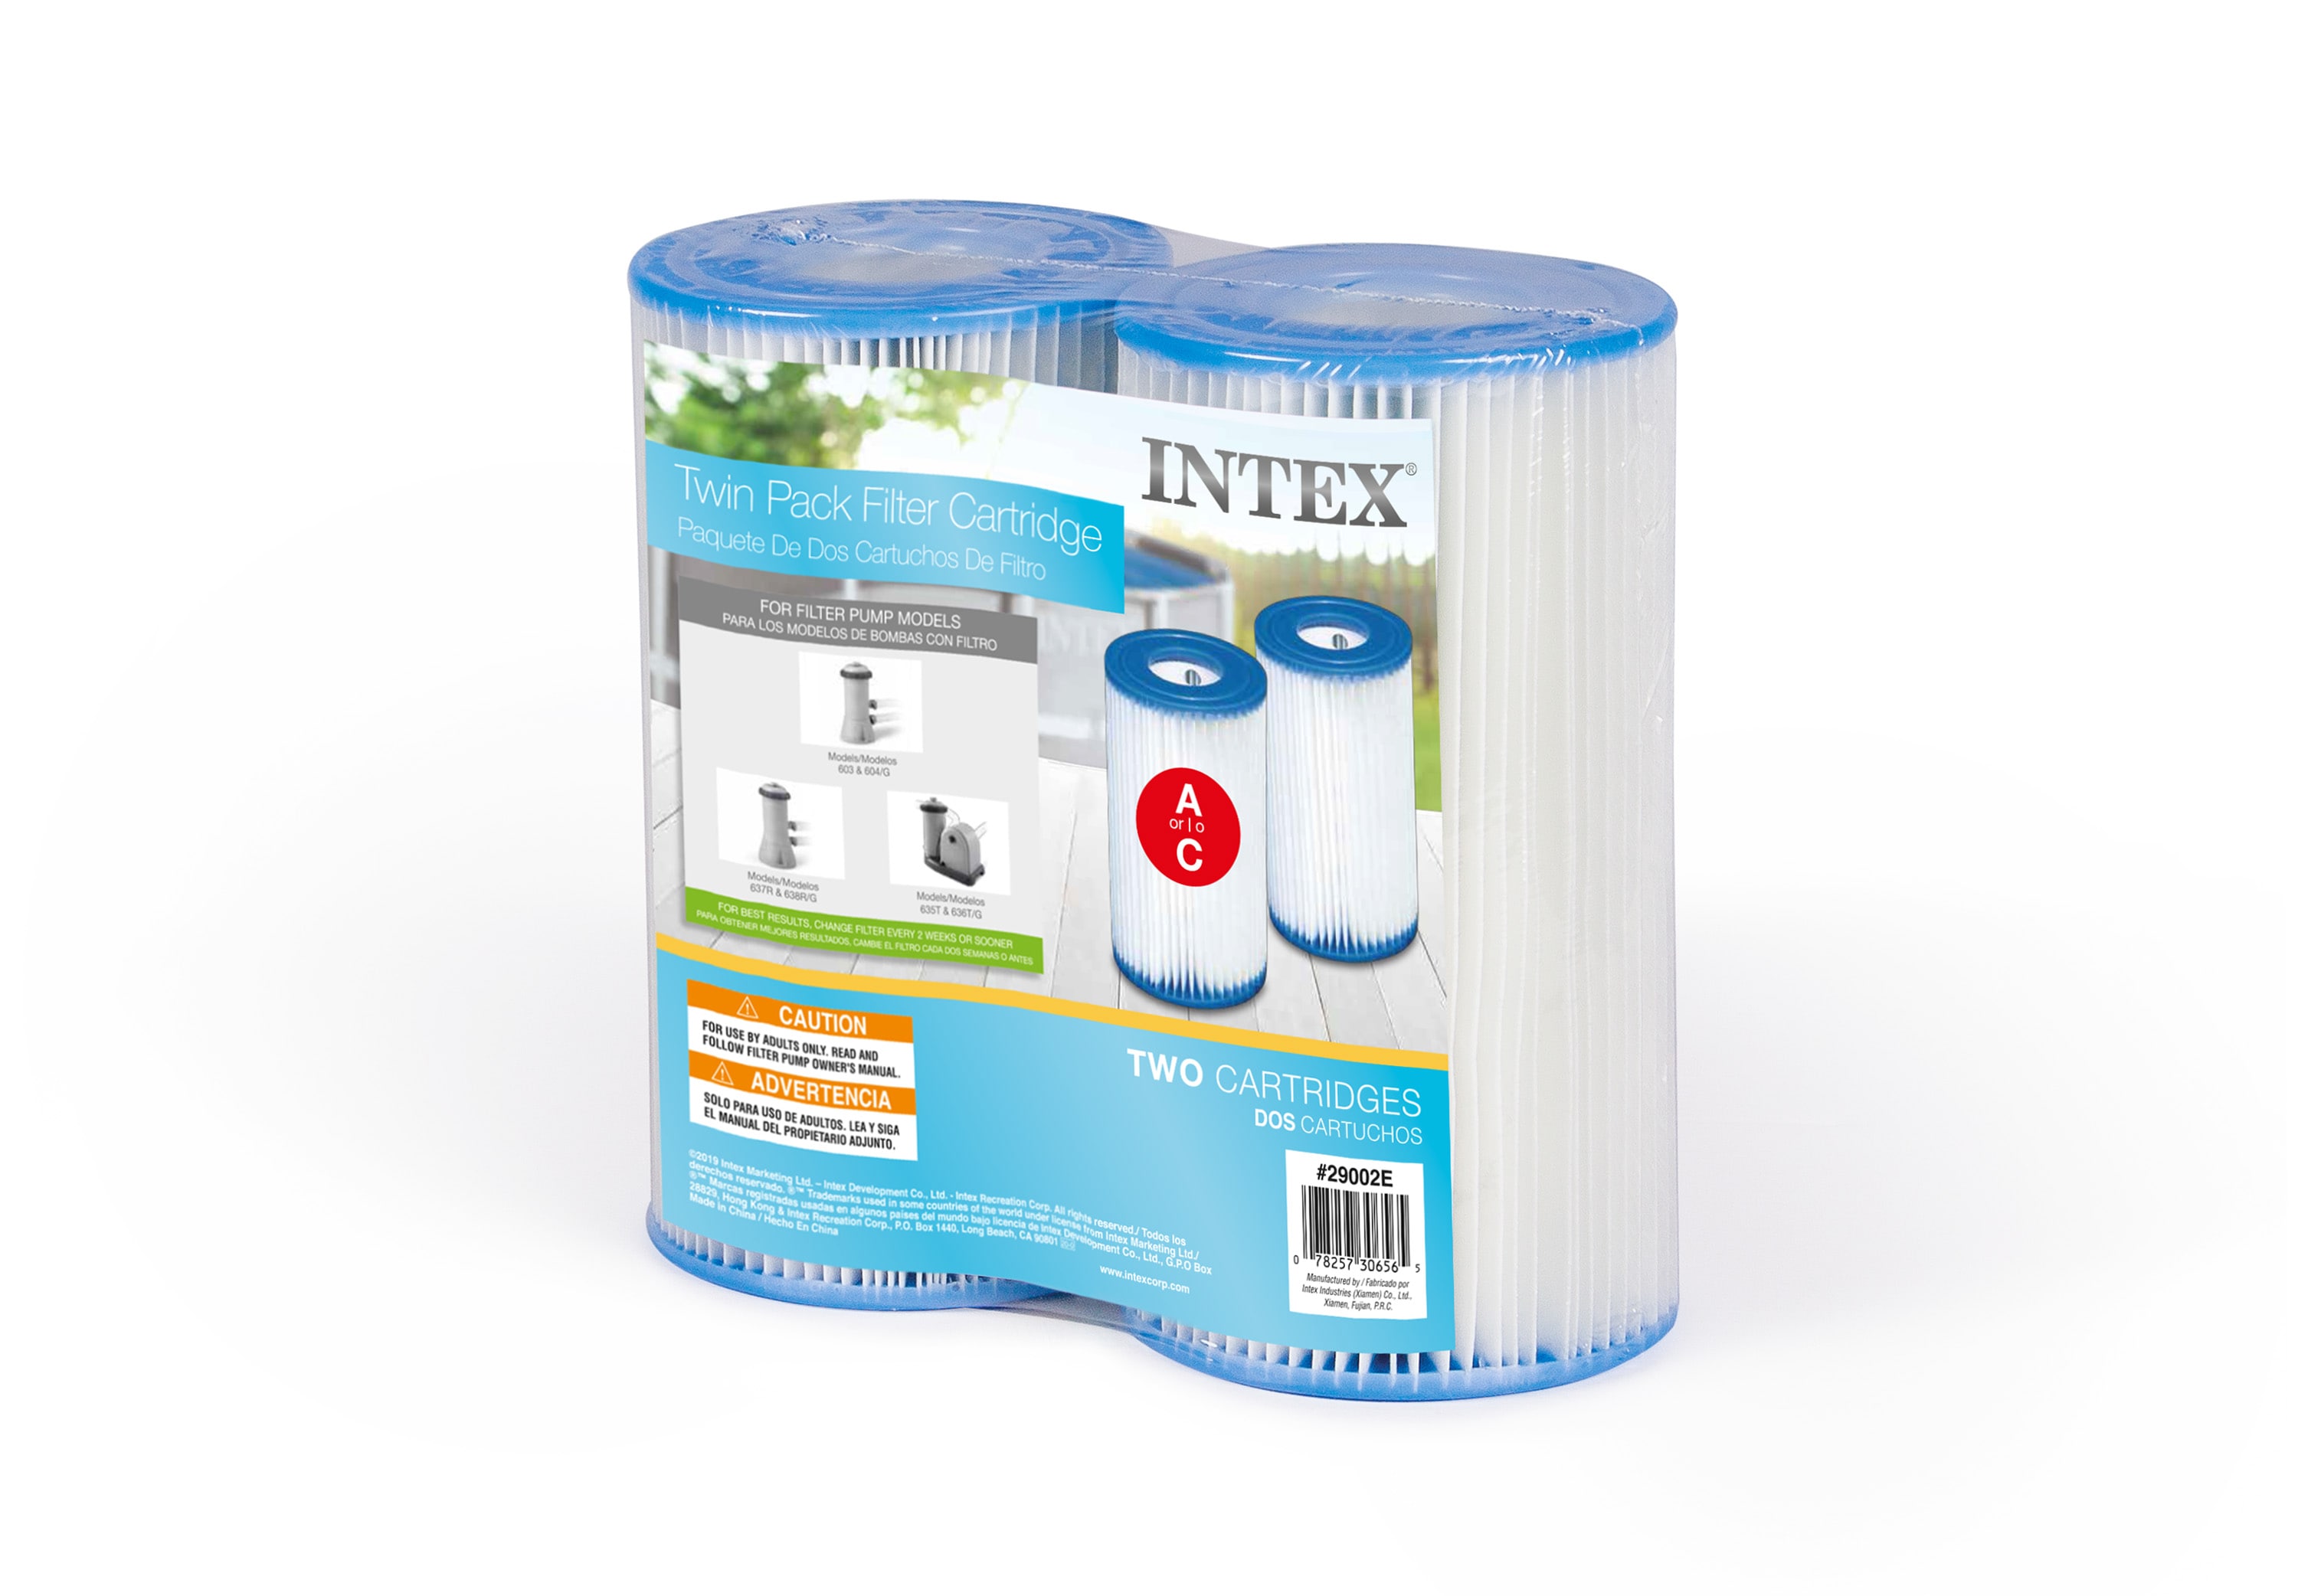 Intex Intex Filter A Pump and Filter Union in the Pool Filter & Skimmer System department at Lowes.com